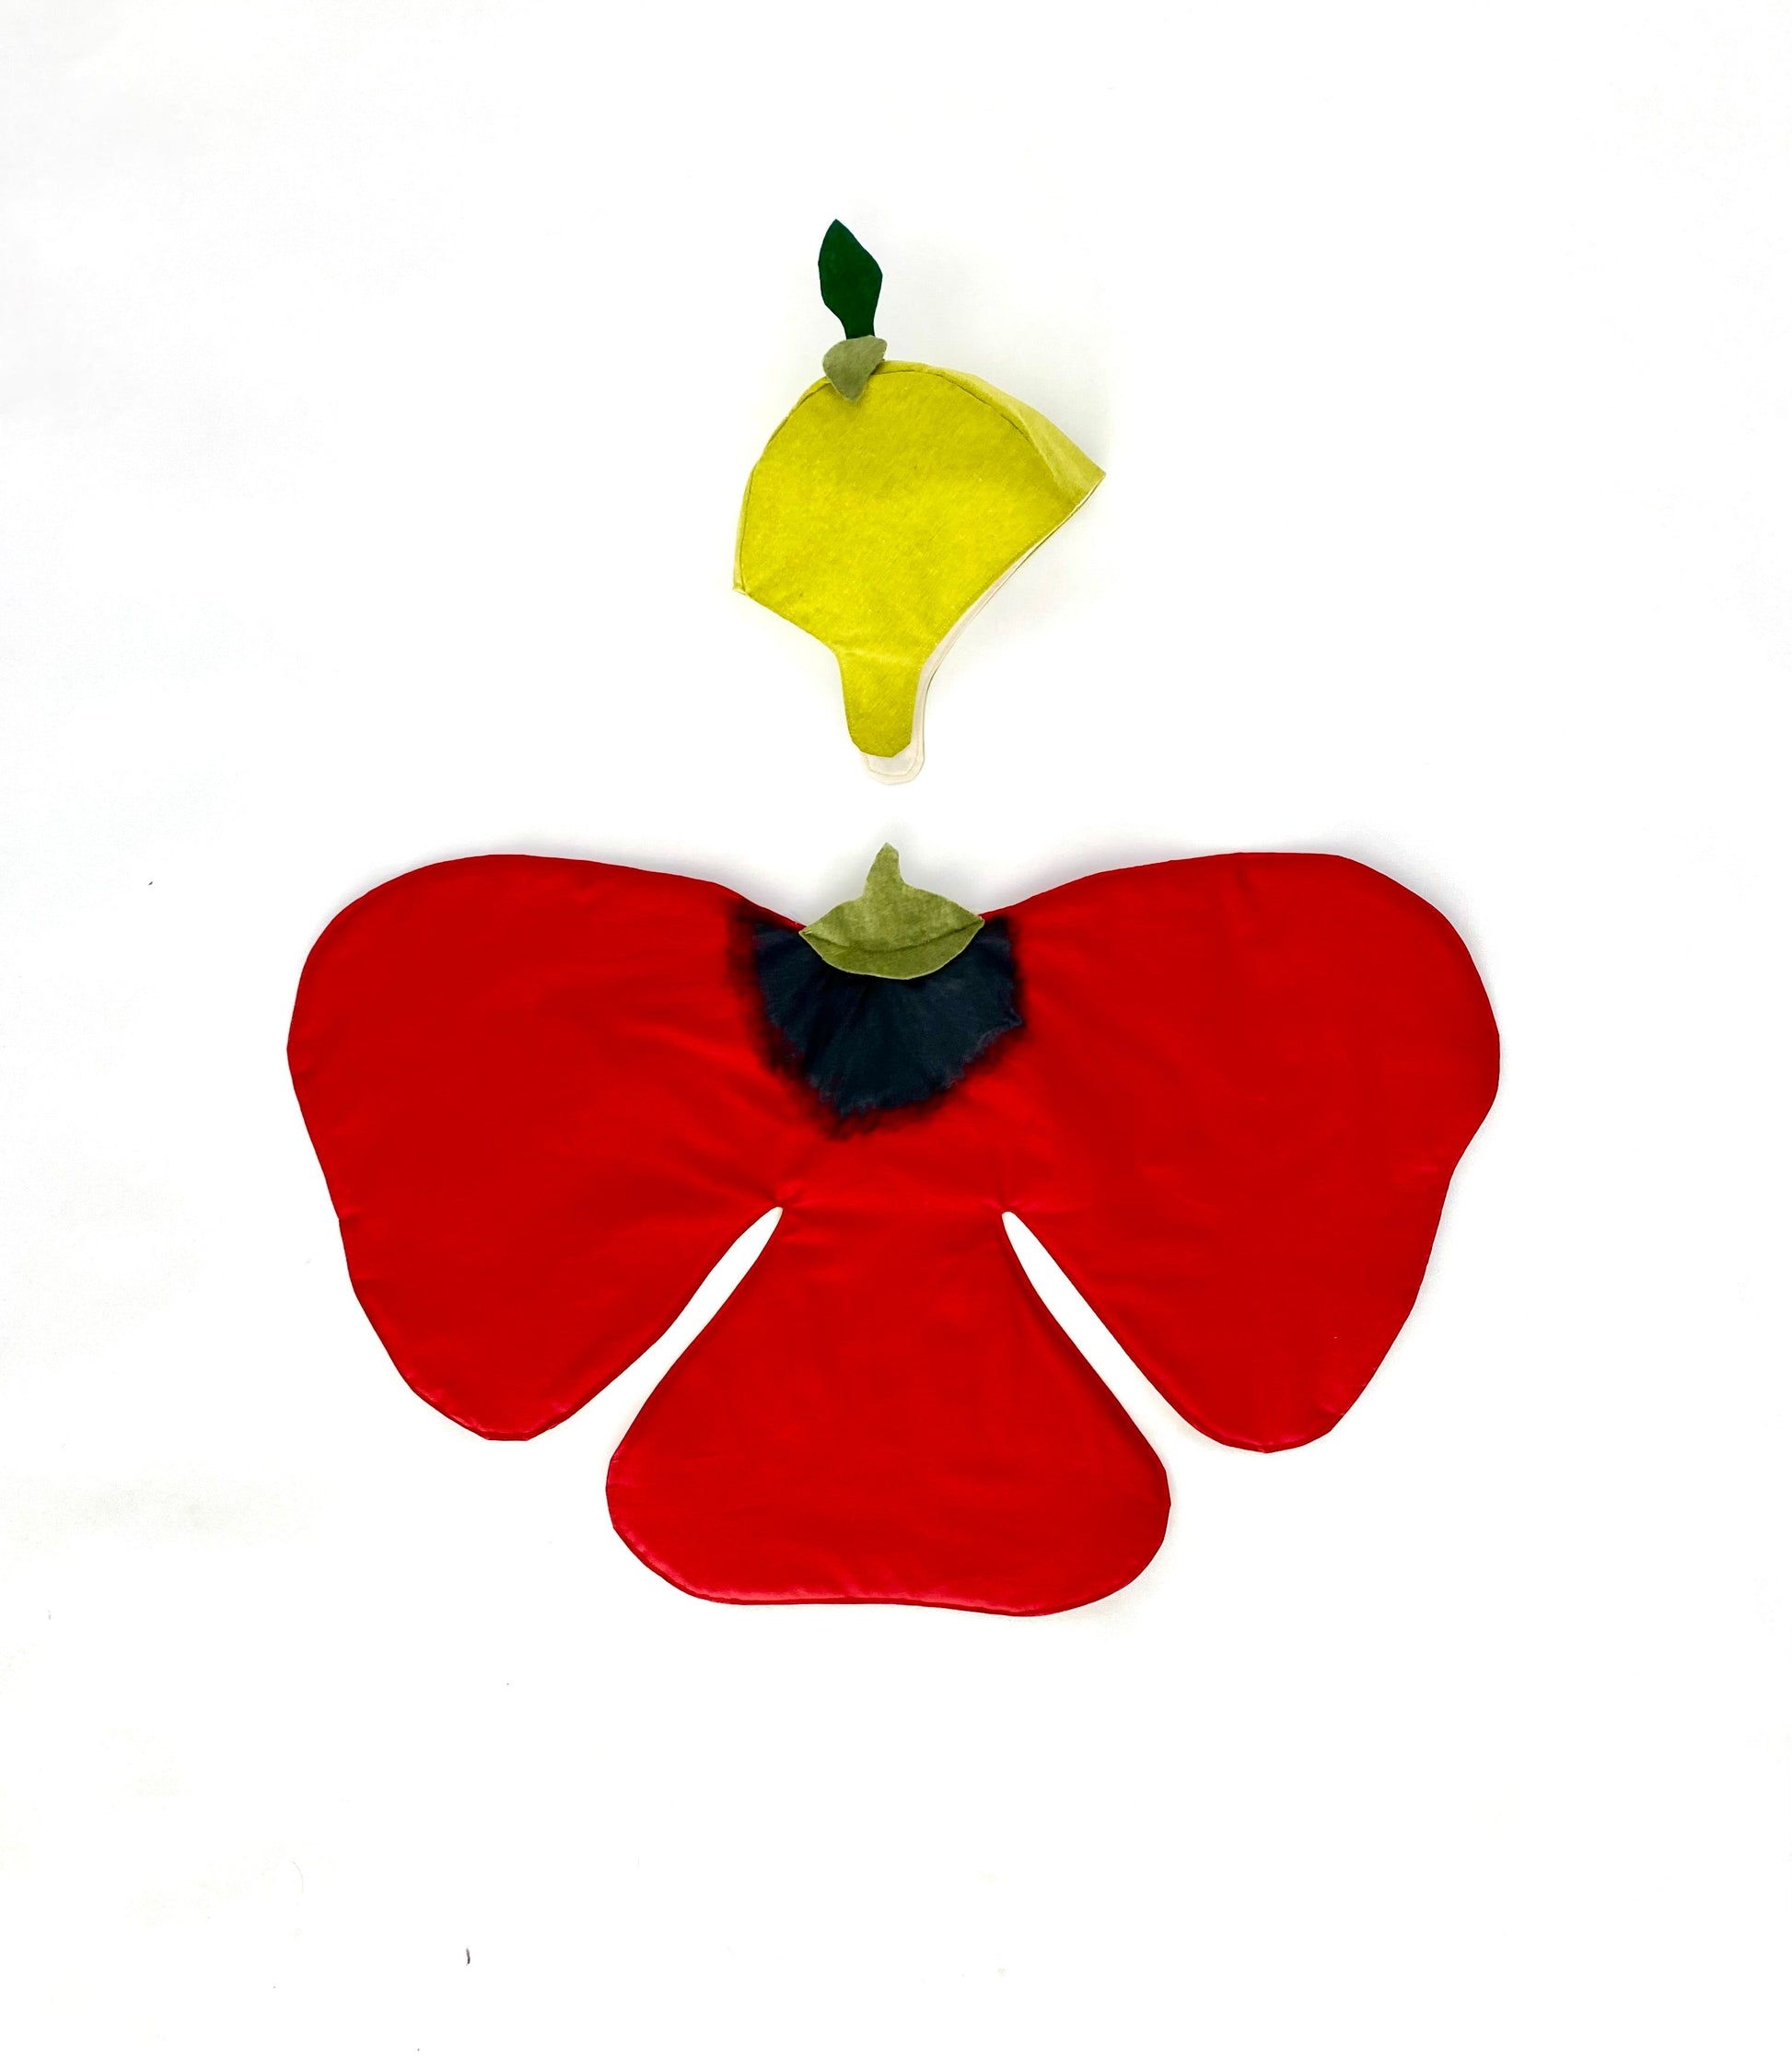 Flower costume and leaf hat for imaginative play.